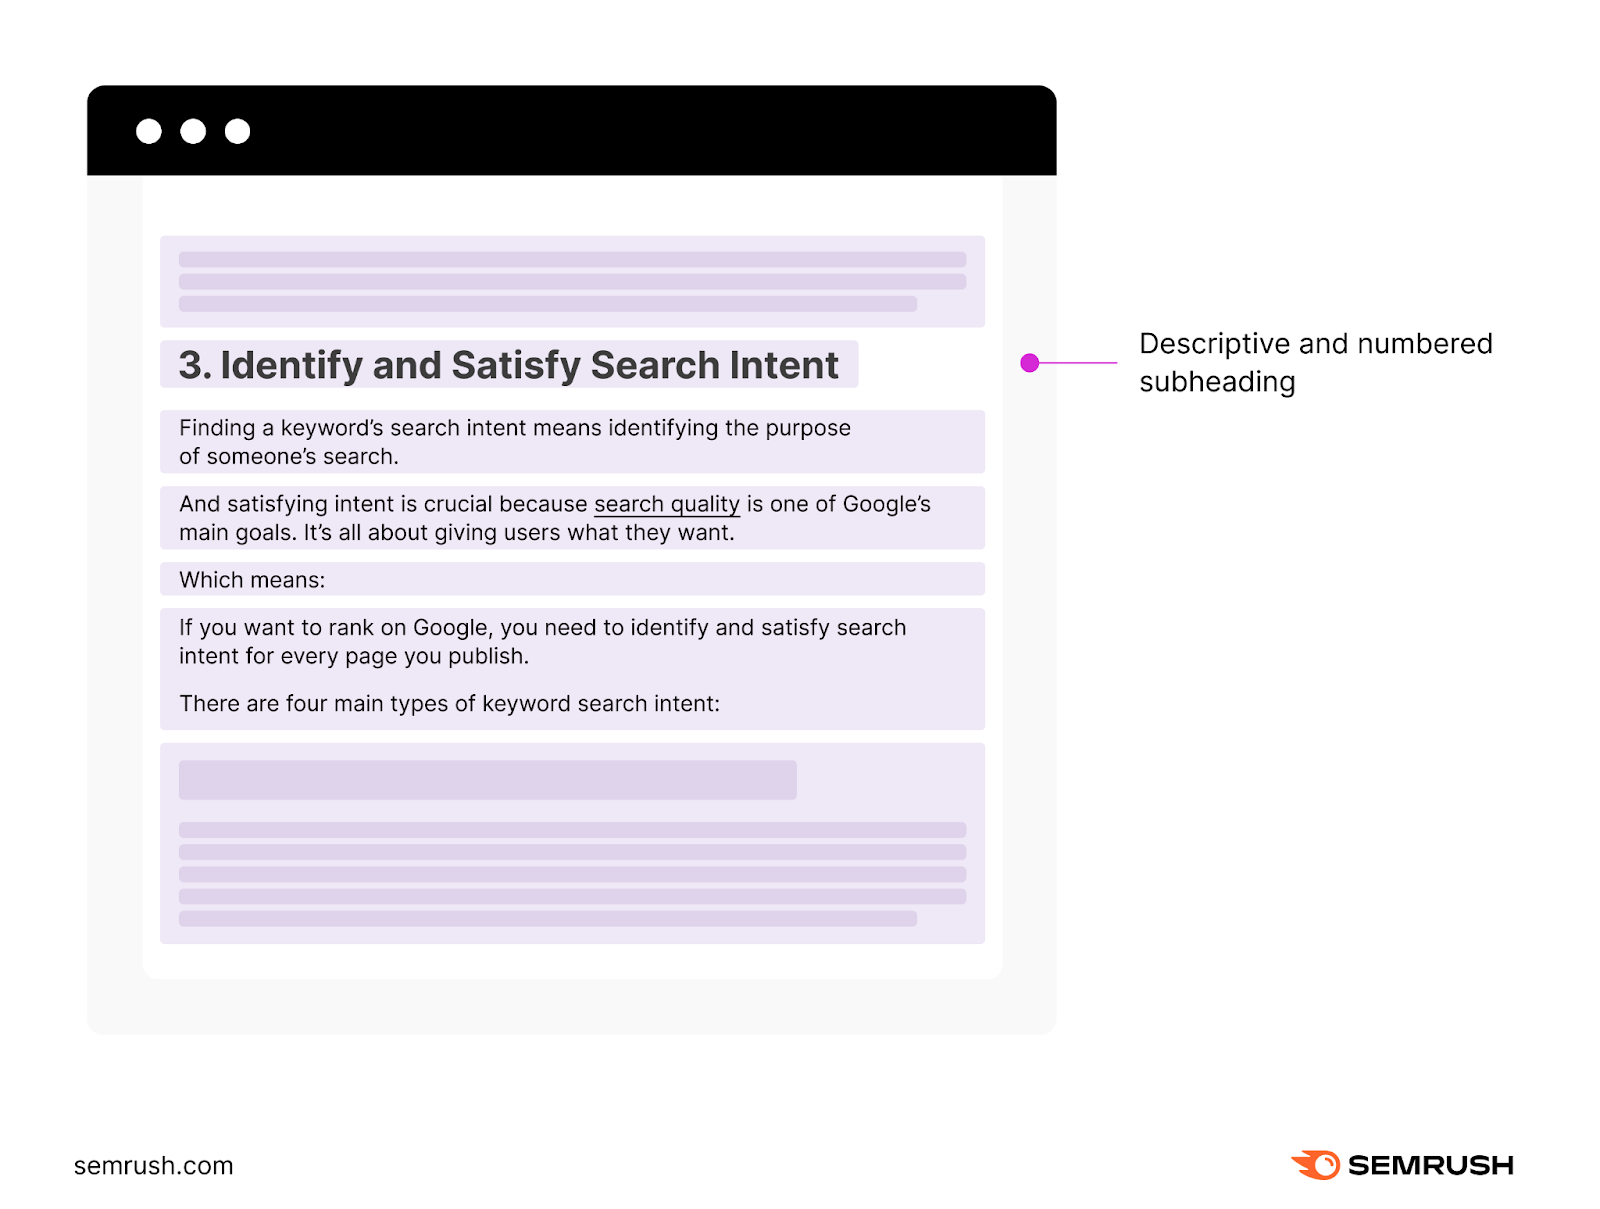 An example of a descriptive, and numbered subheading "3. Identify and Satisfy Search Intent"